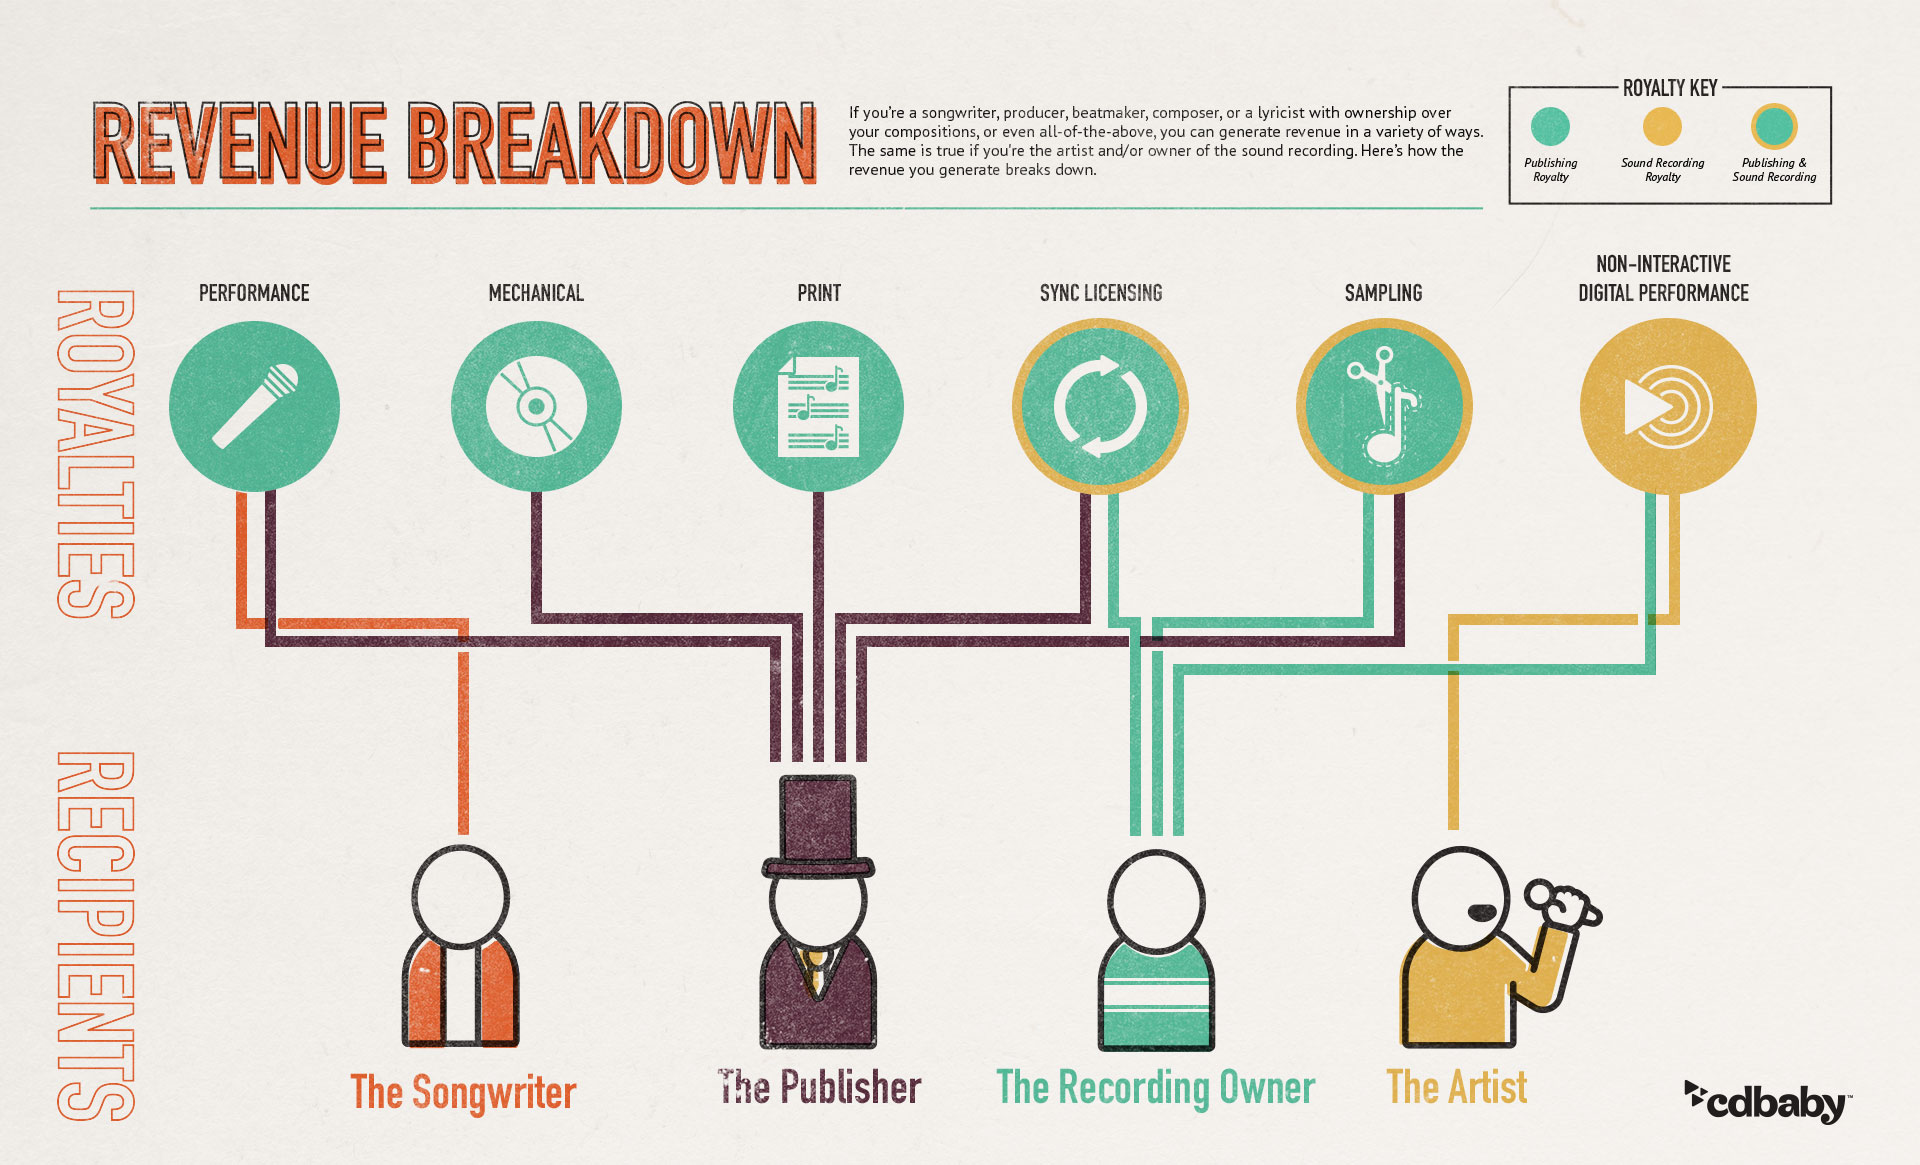 An infographic showing how music royalties flow